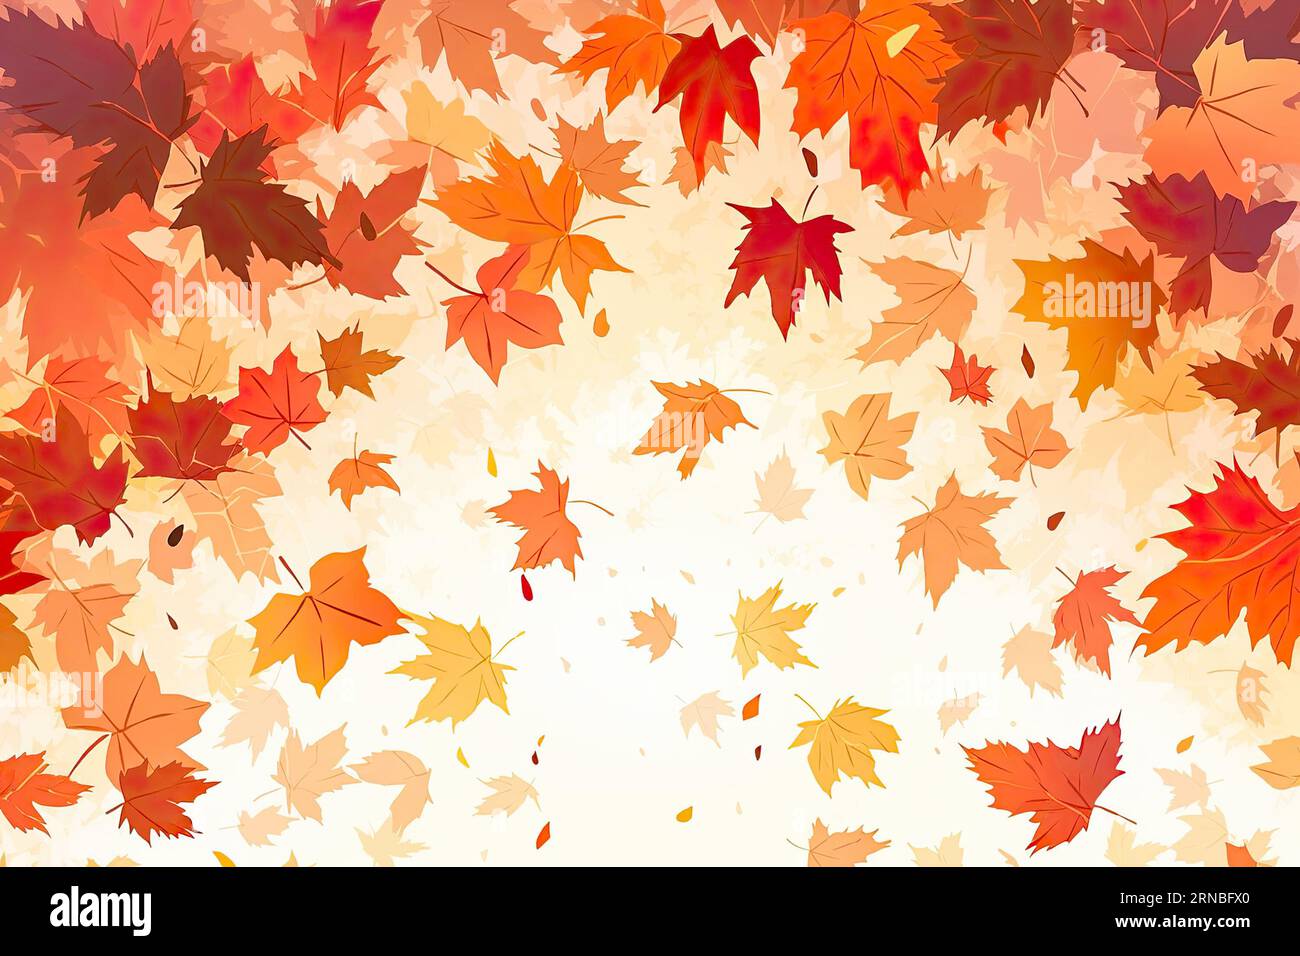 Falling leaves nature background Stock Photo